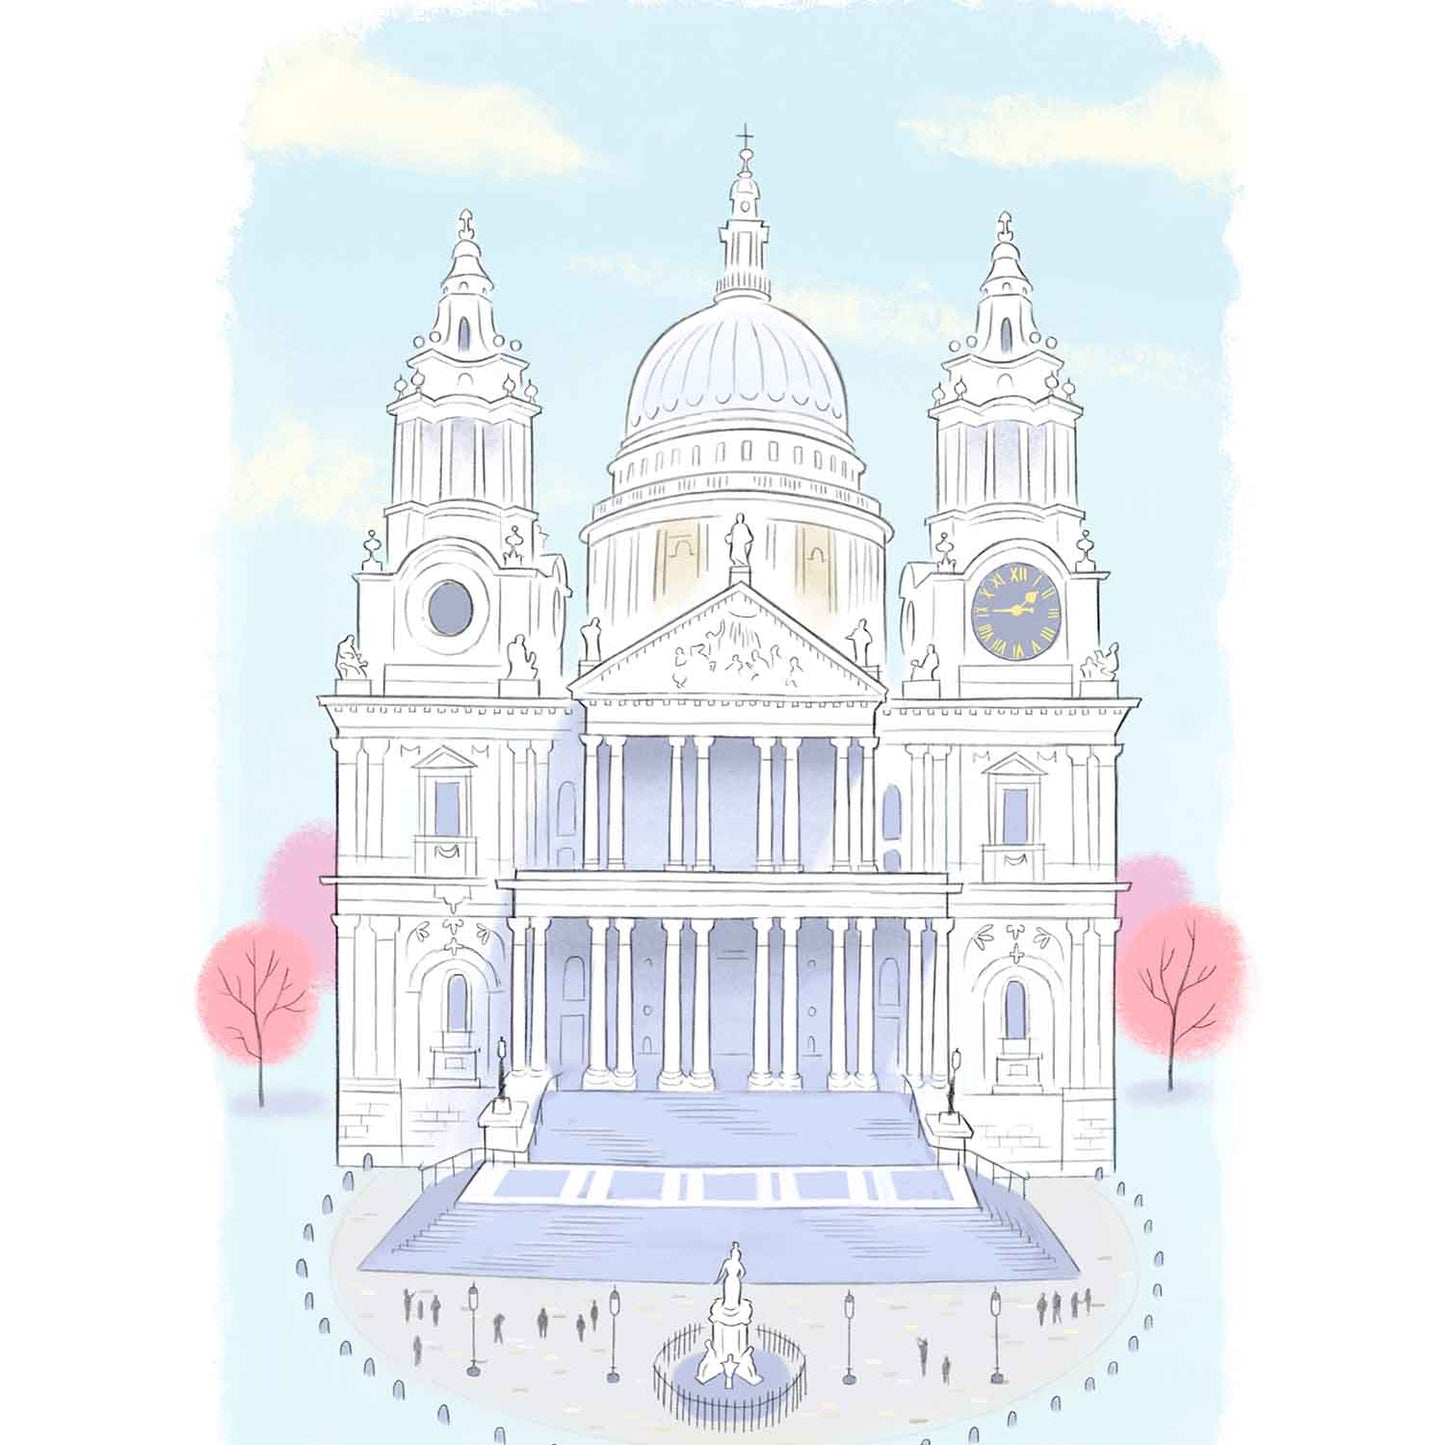 A close up London's St Pauls Cathedral illustration by mike green illustration.